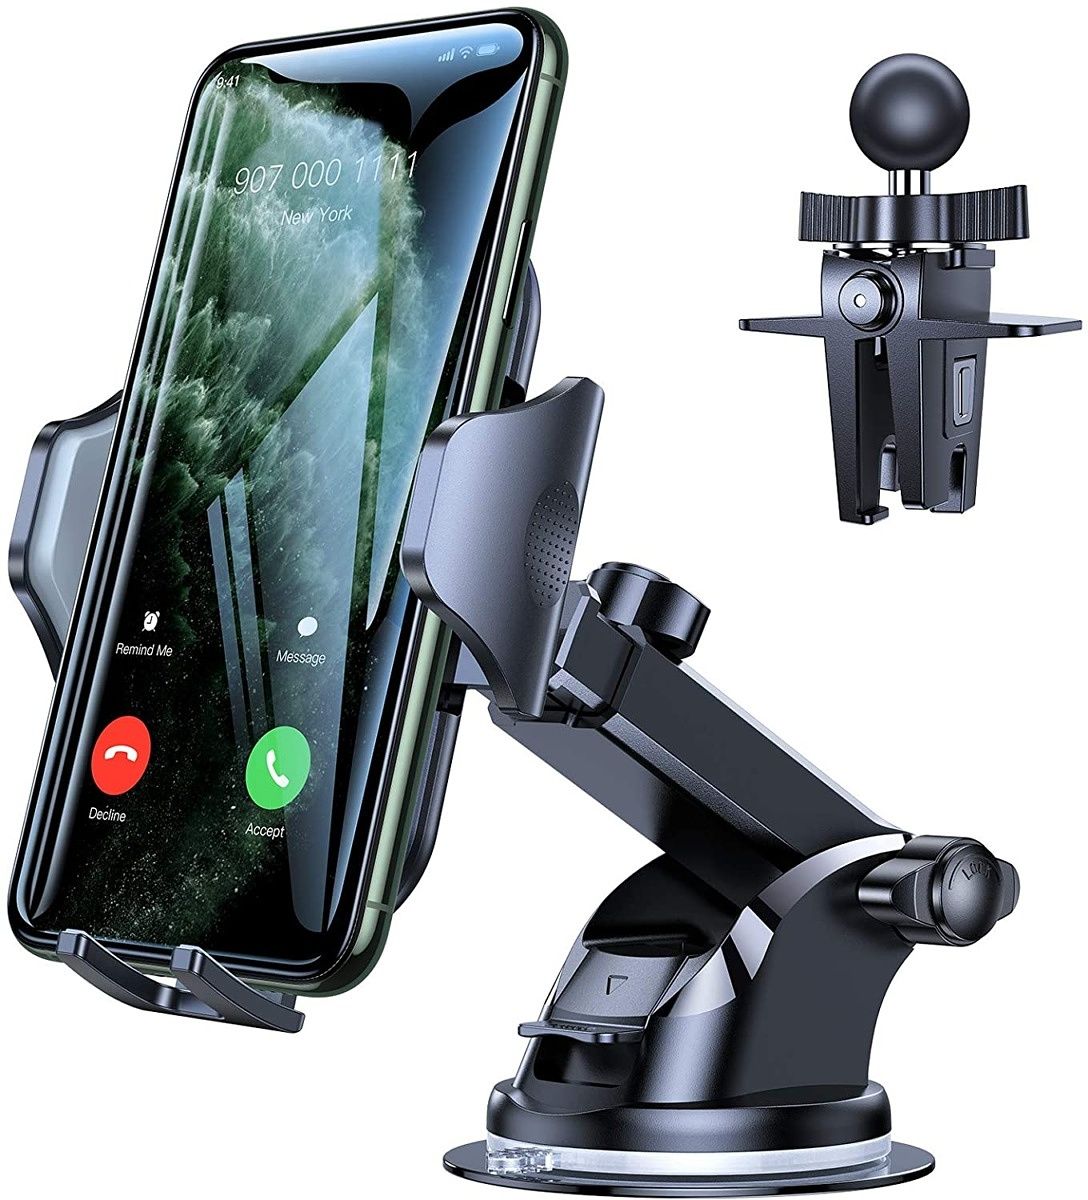 The Vicseed car mount, as you can see, is a suction cup-based mount that can easily hold your smartphone in place while you're driving.  This particular phone holder is reasonably priced and is suitable for holding the regular Pixel 7 and Pixel 7 Pro without any issues.